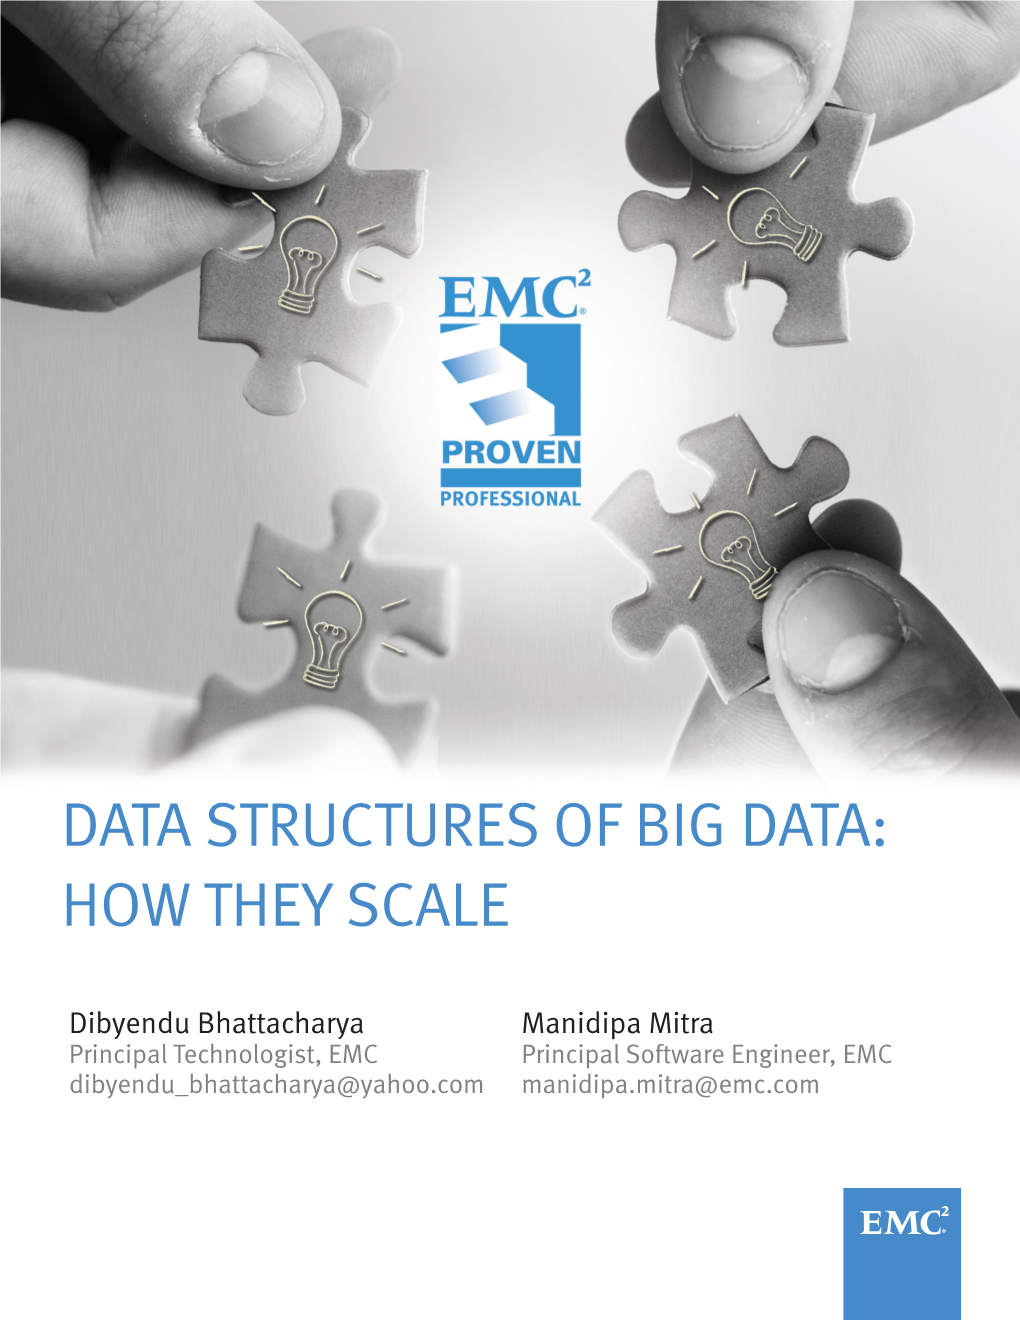 Data Structures of Big Data: How They Scale